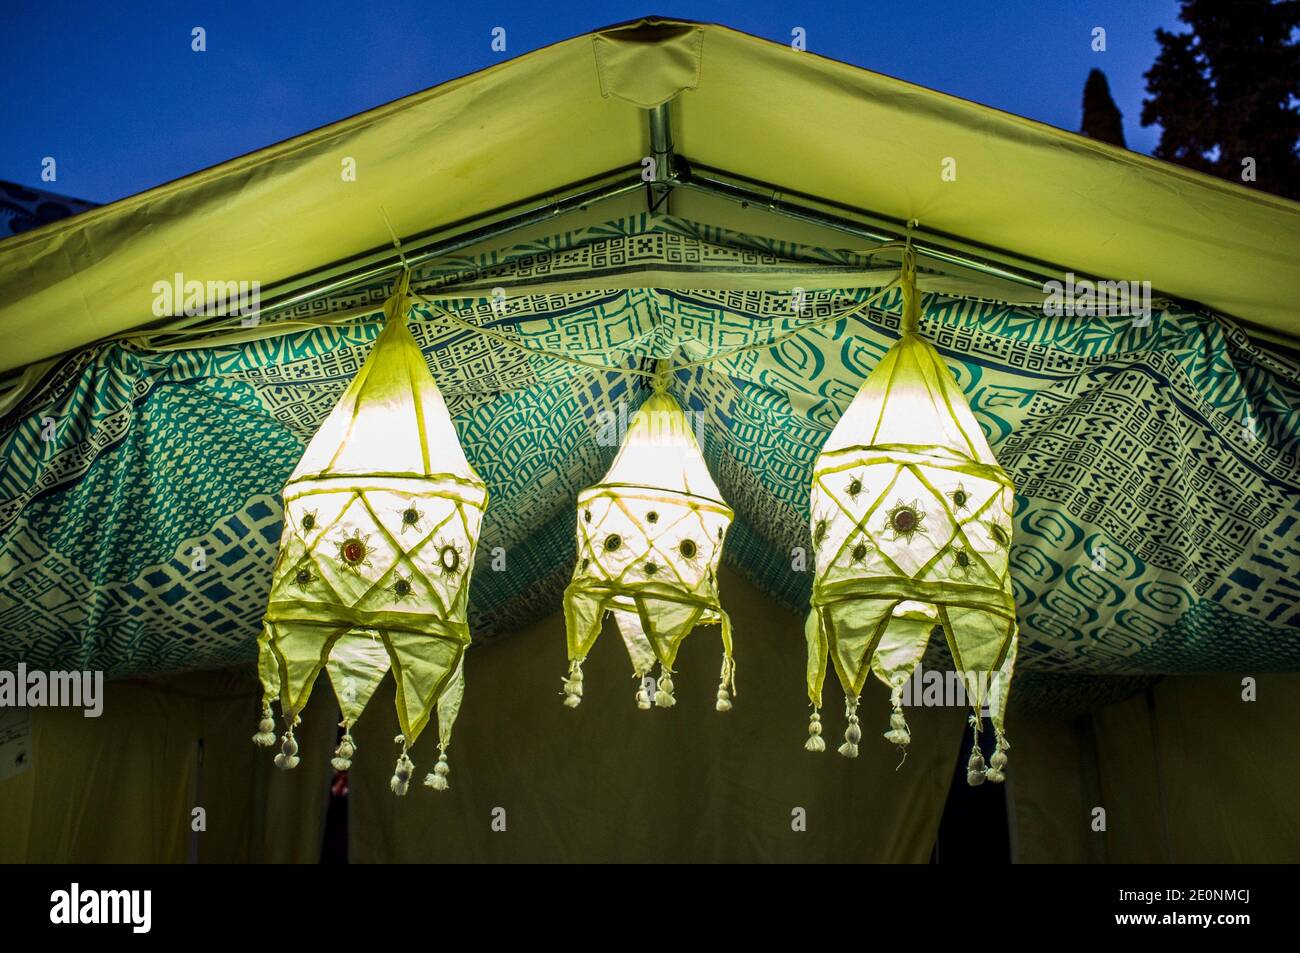 Oriental fabric lanterns inside a tent entry. Dusk background. Stock Photo